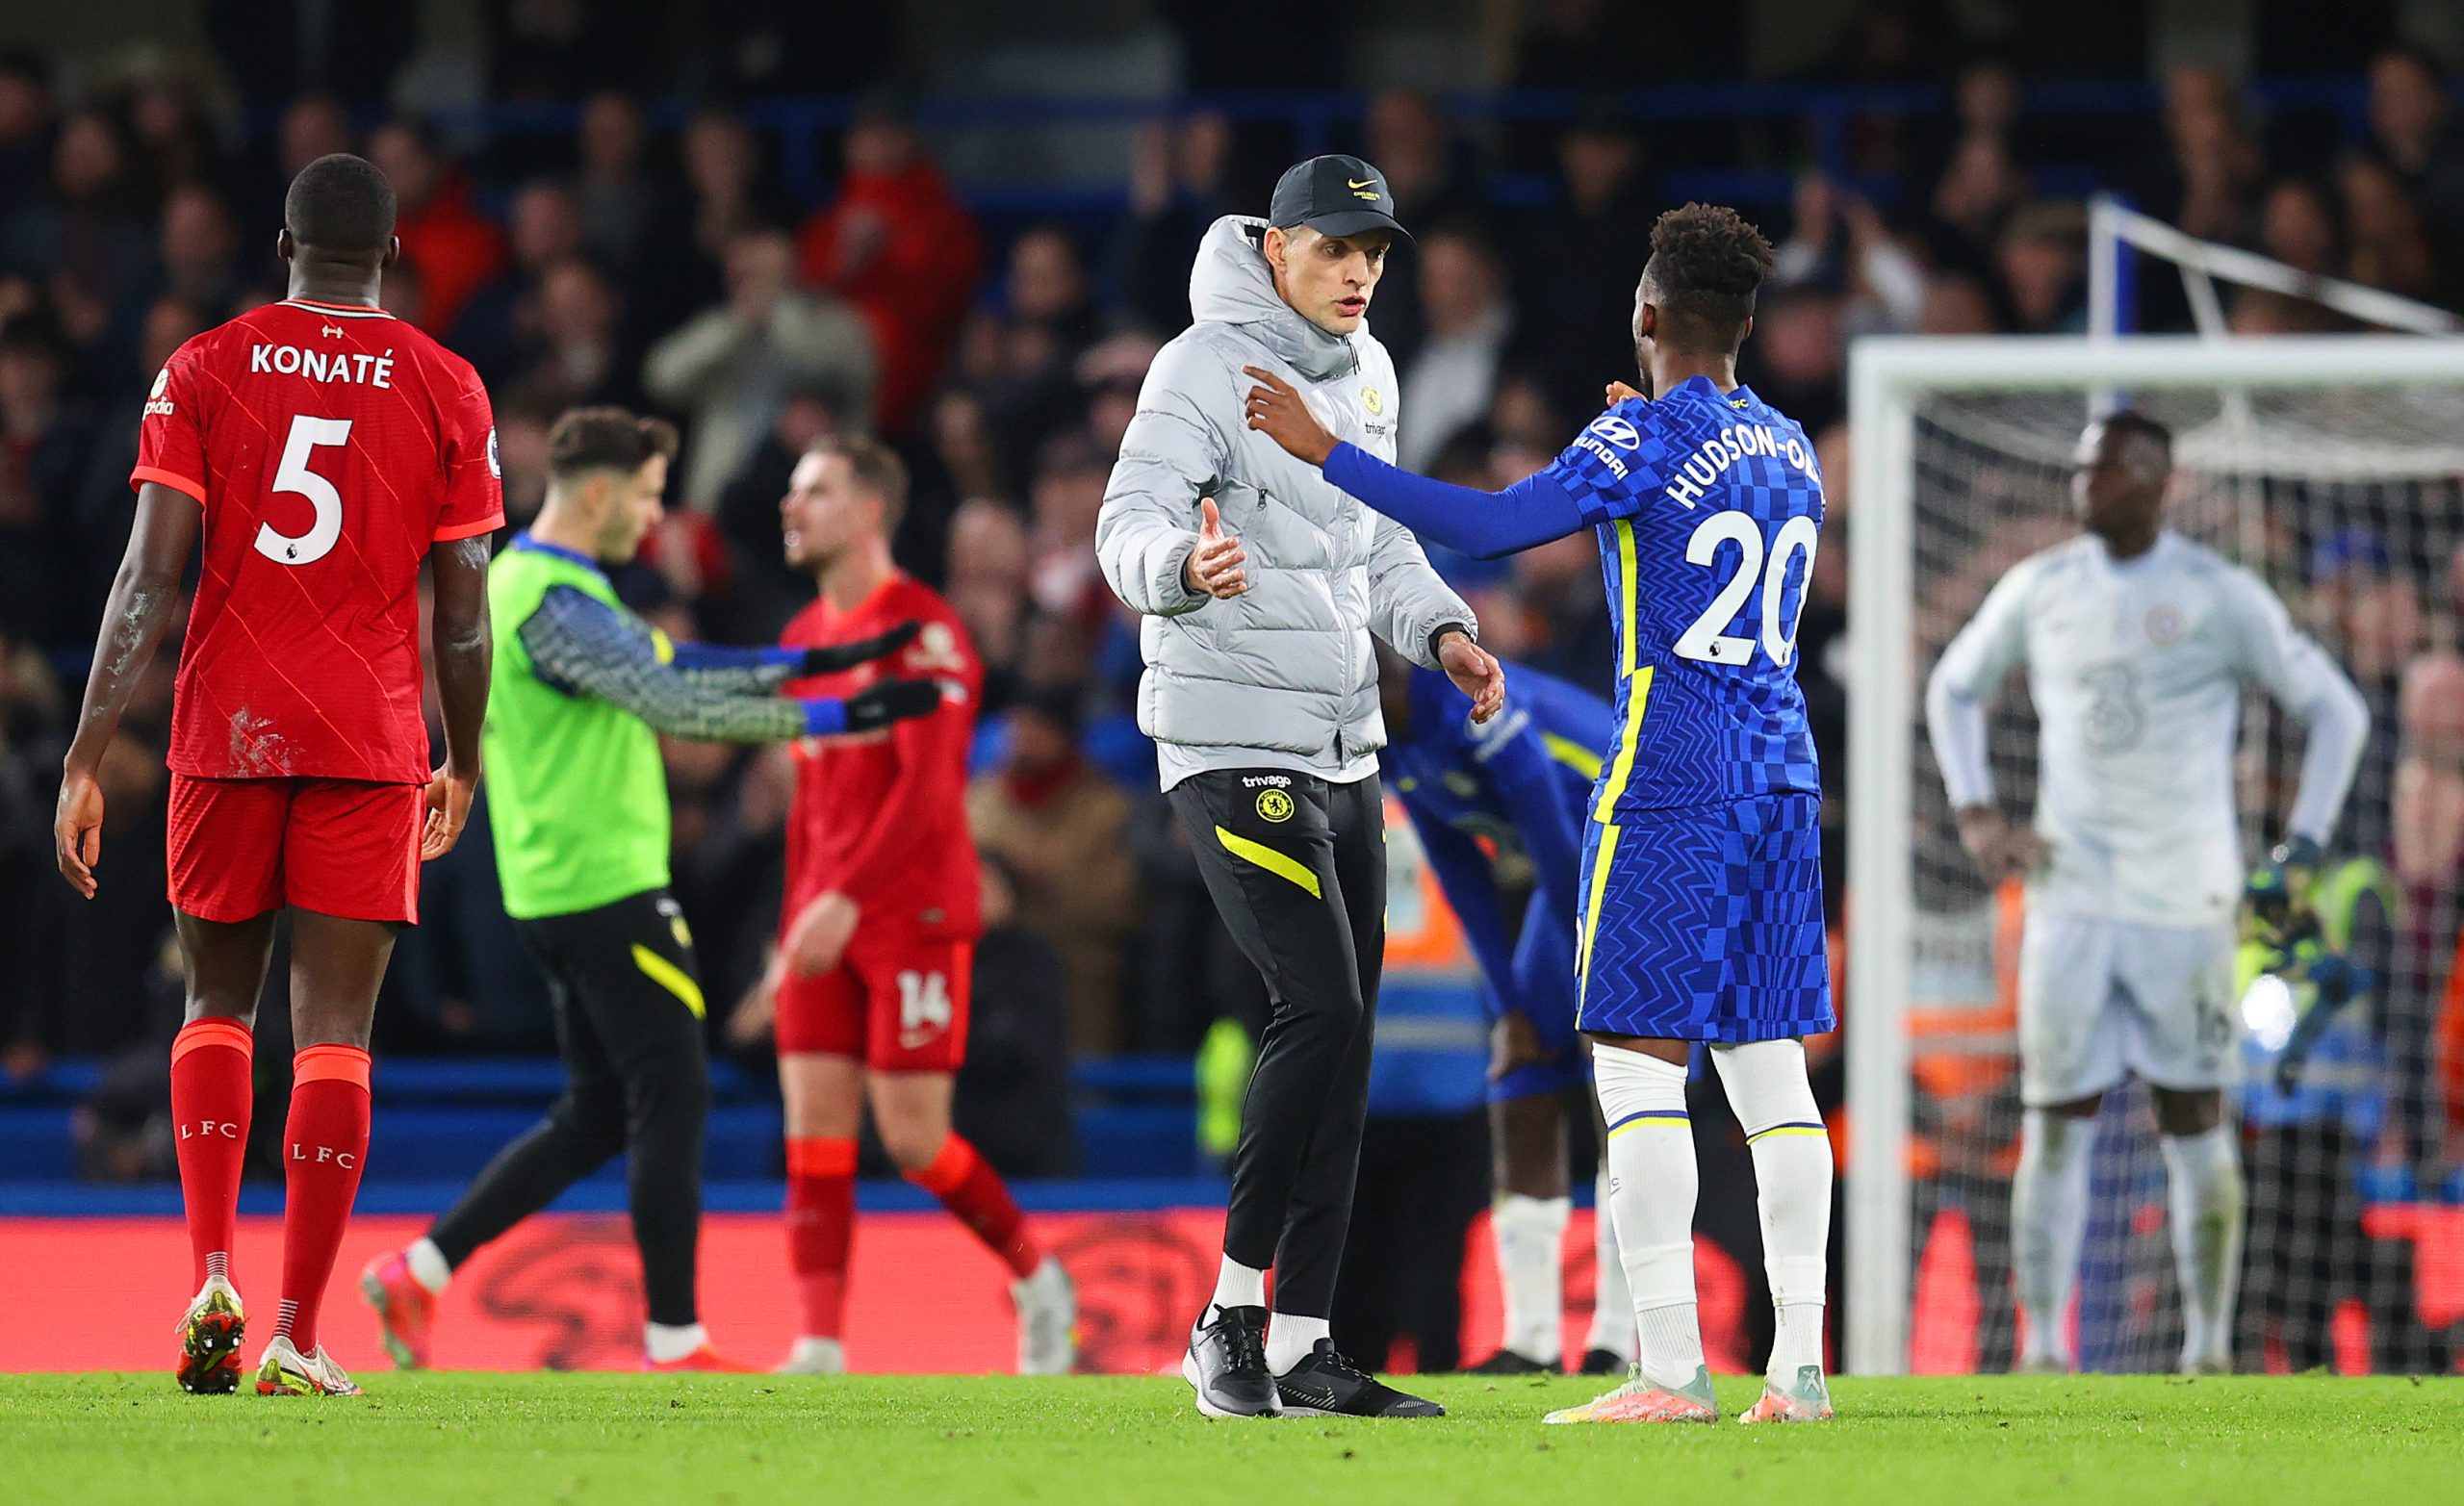 Thomas Tuchel claims Chelsea did well to come back against Liverpool in the 2-2 draw.